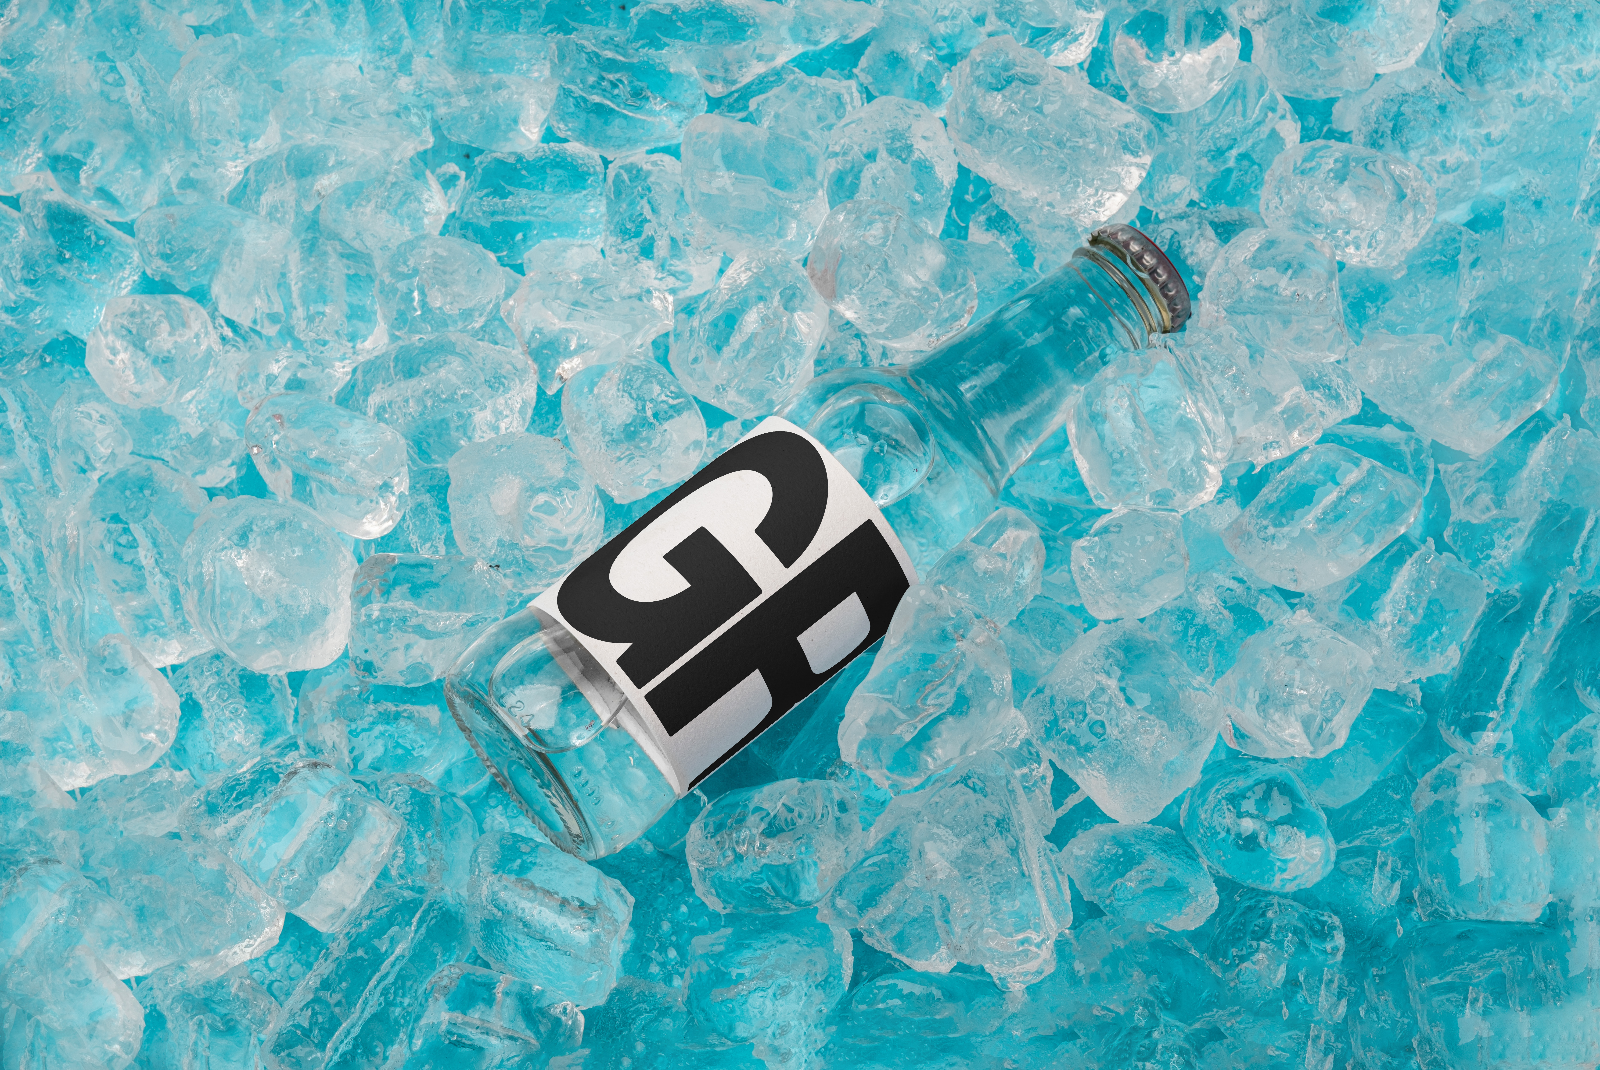 Clear glass water bottle with generic label mockup lying on scattered blue ice cubes, ideal for beverage packaging designs.